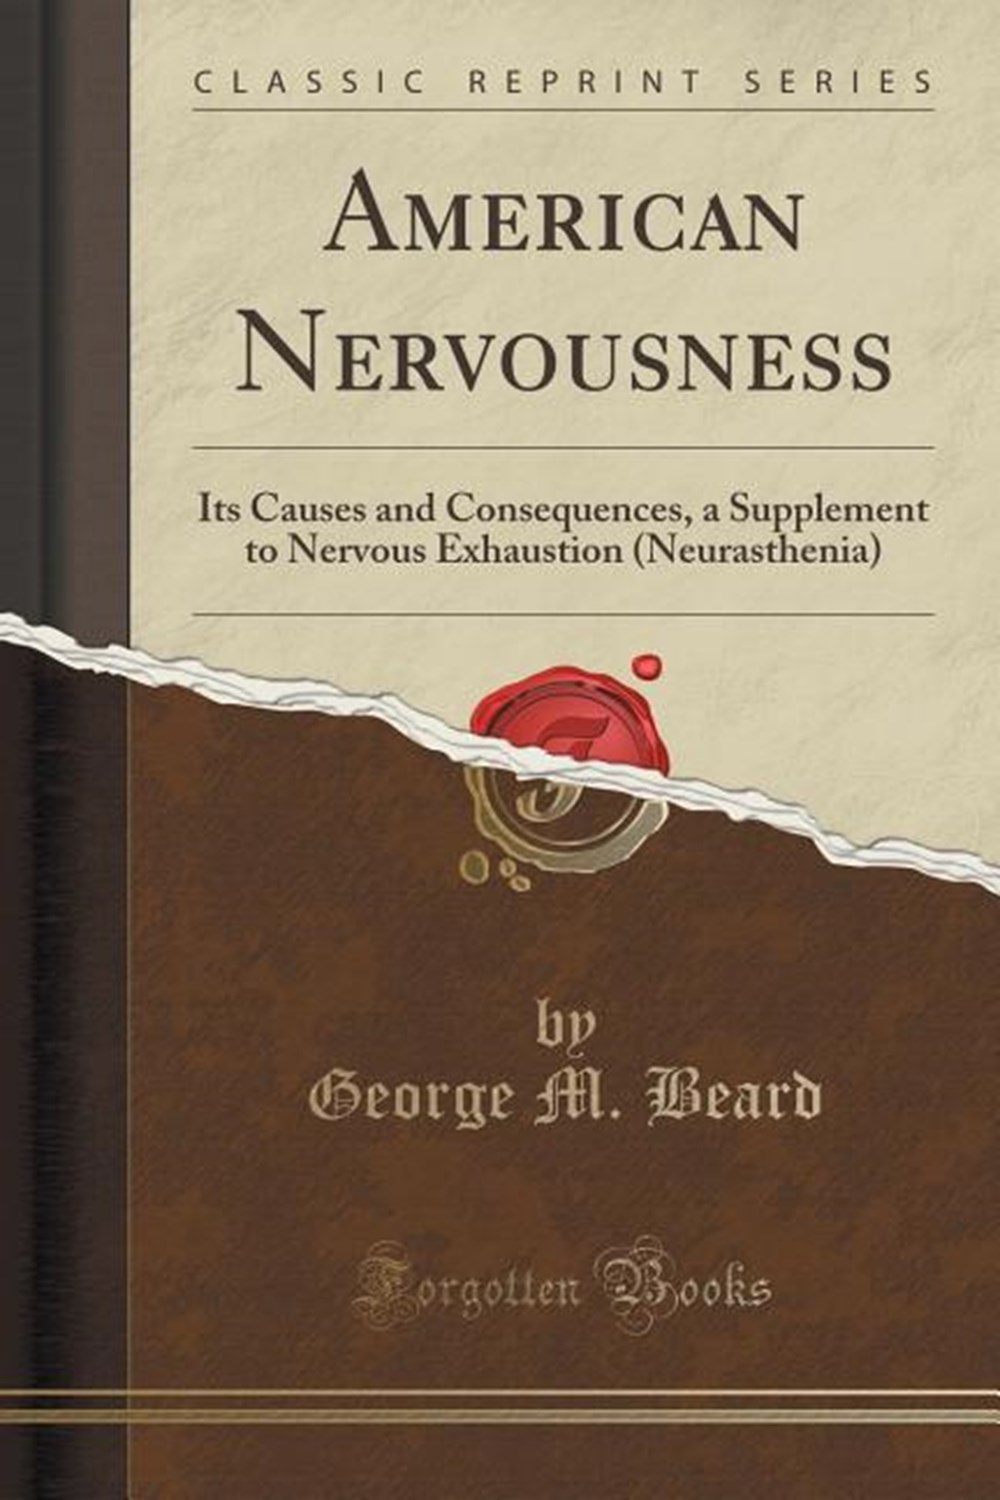 American Nervousness: Its Causes and Consequences, a Supplement to Nervous Exhaustion (Neurasthenia)